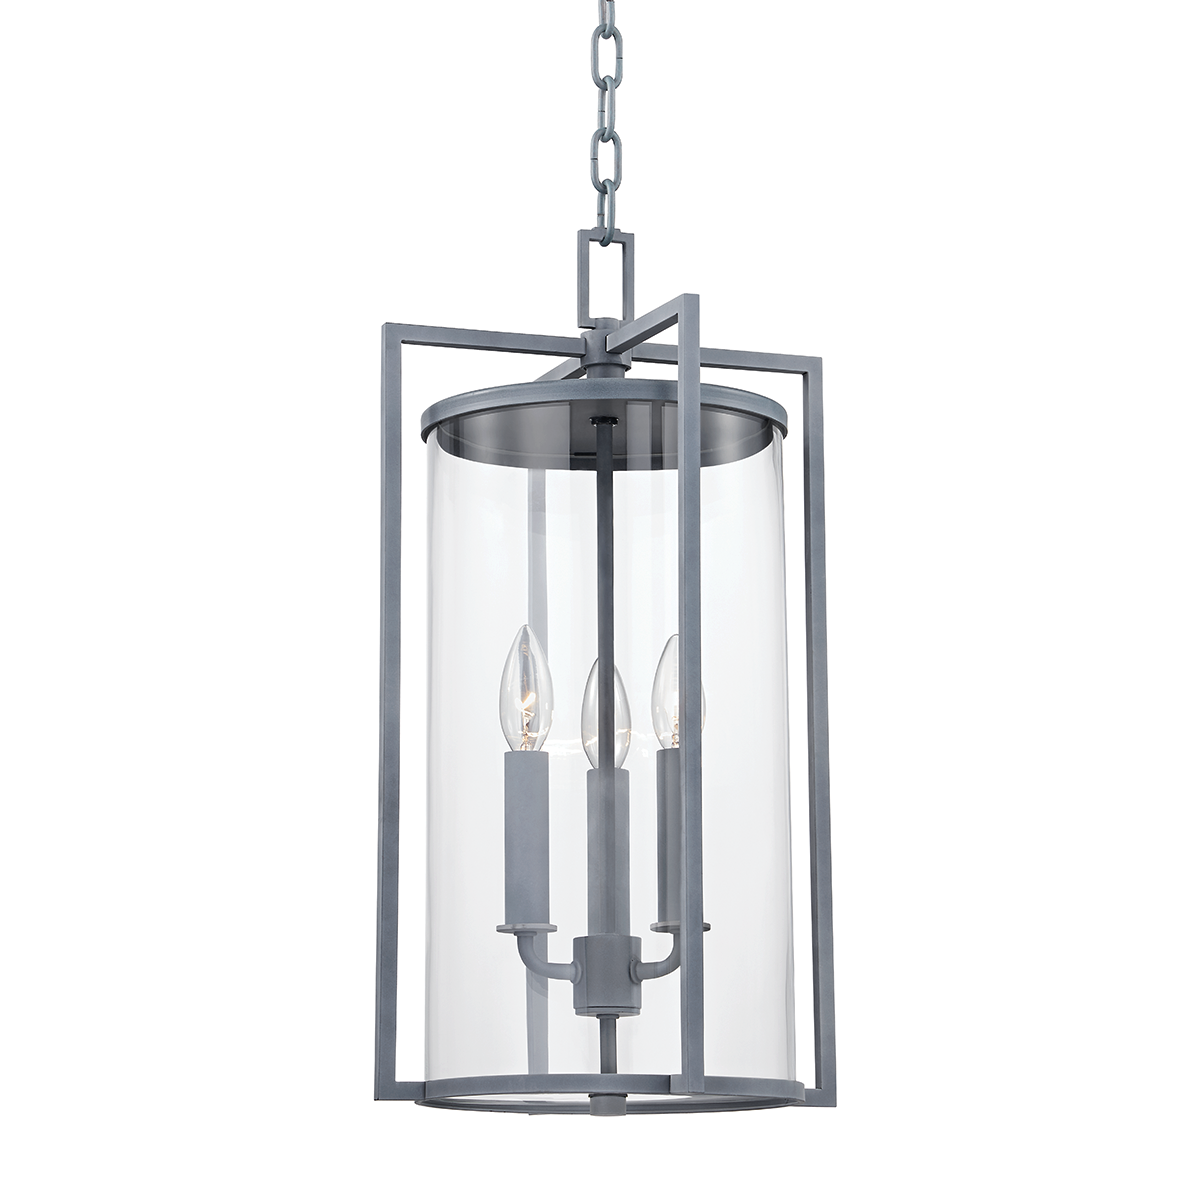 Troy PERCY 3 LIGHT EXTERIOR LANTERN F1146 Outdoor l Wall Troy Lighting WEATHERED ZINC  